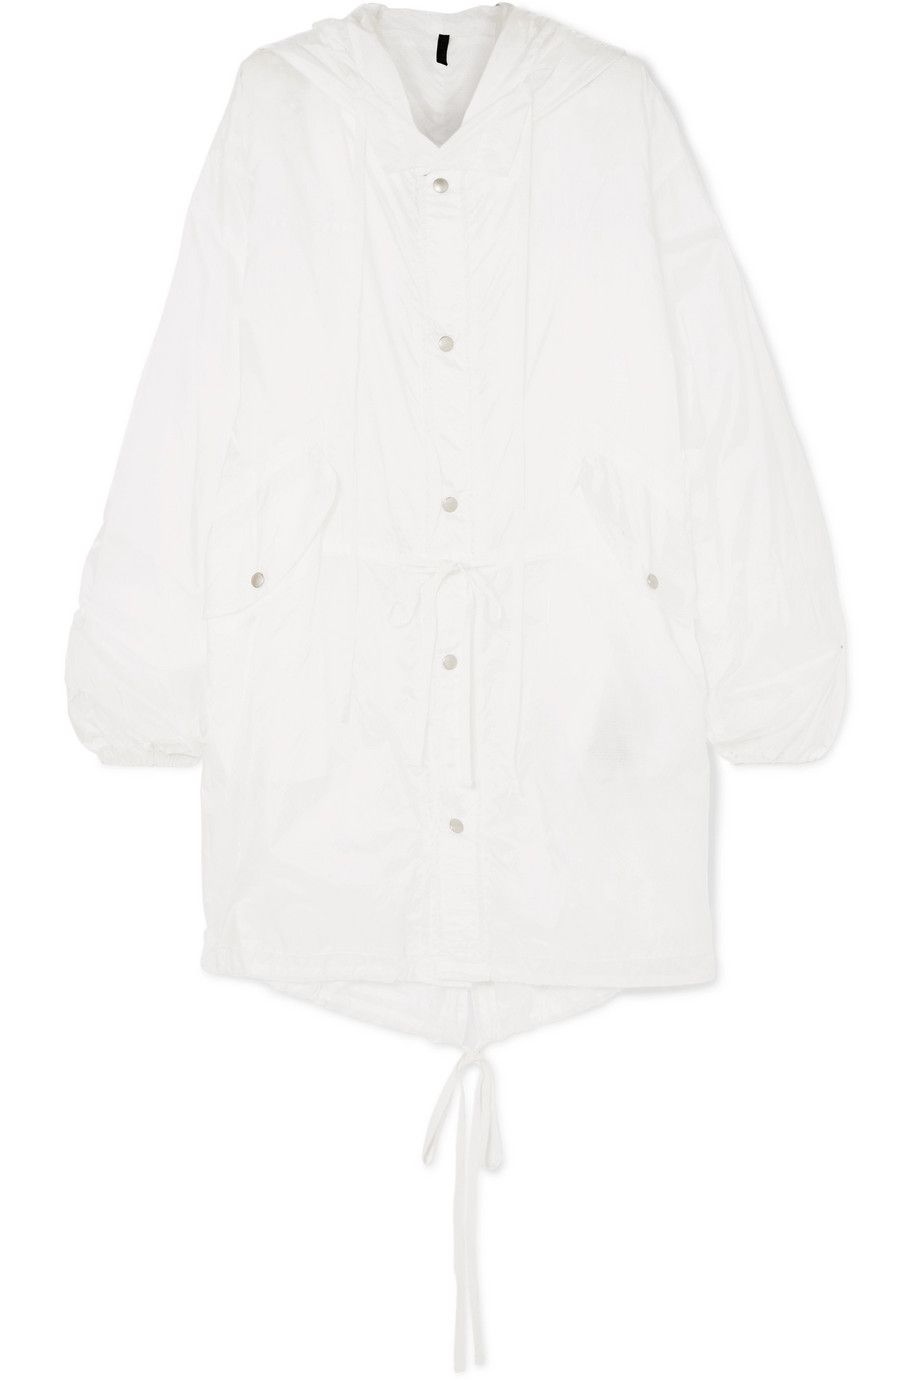 Clothing, White, Outerwear, Sleeve, Collar, Coat, Jacket, Beige, Button, Top, 